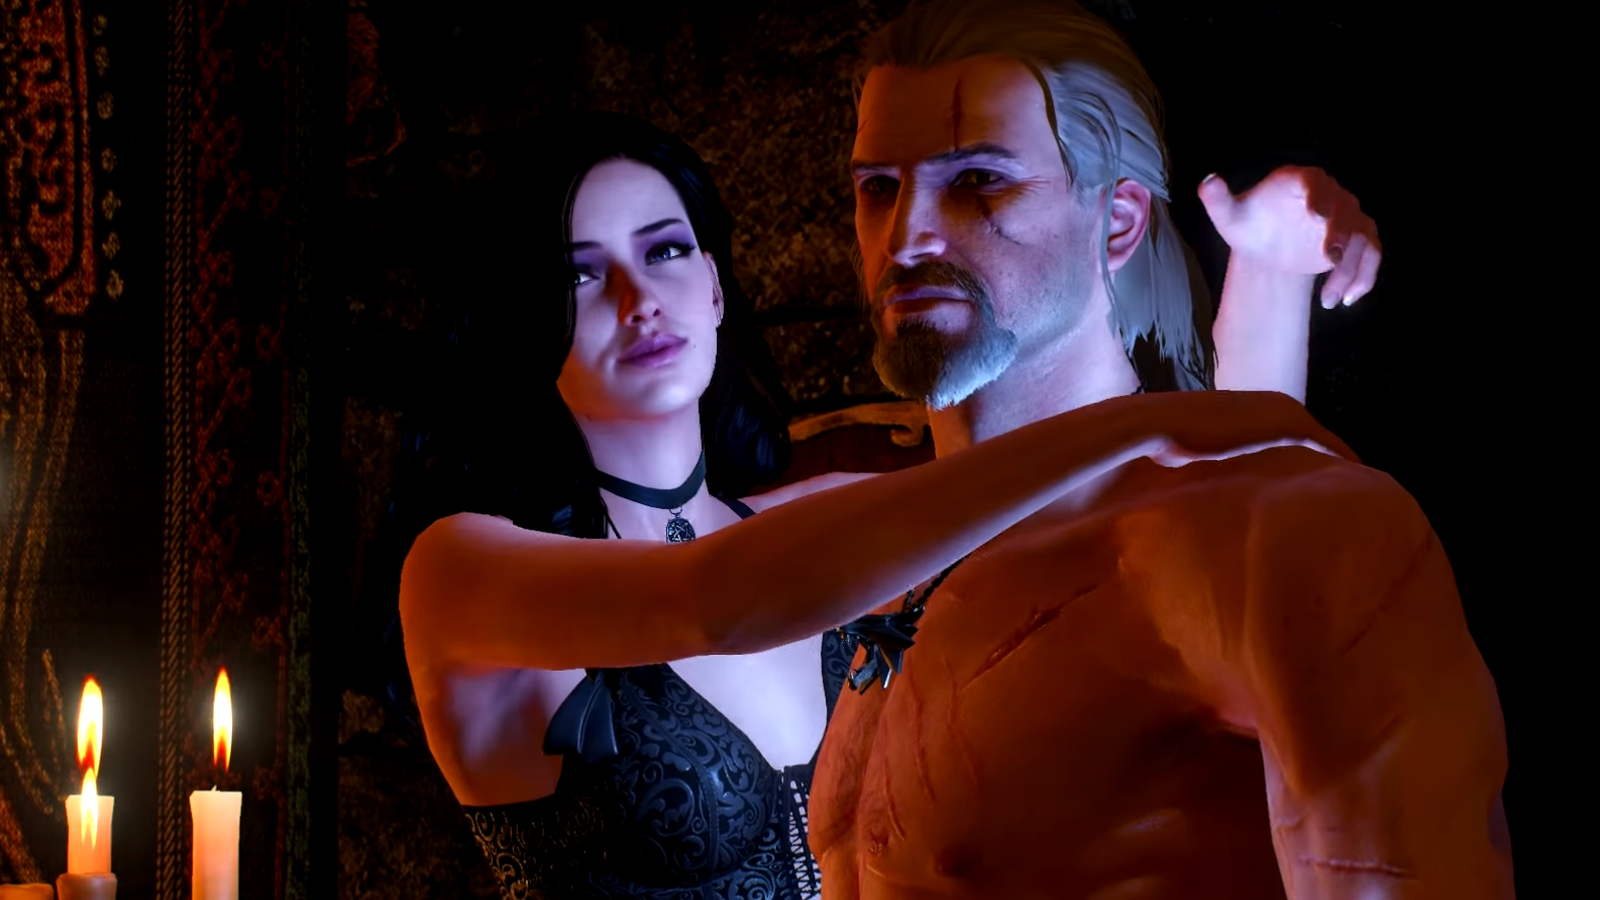 Why sex matters in Witcher 3, the Grand Theft Auto of fantasy games, Games